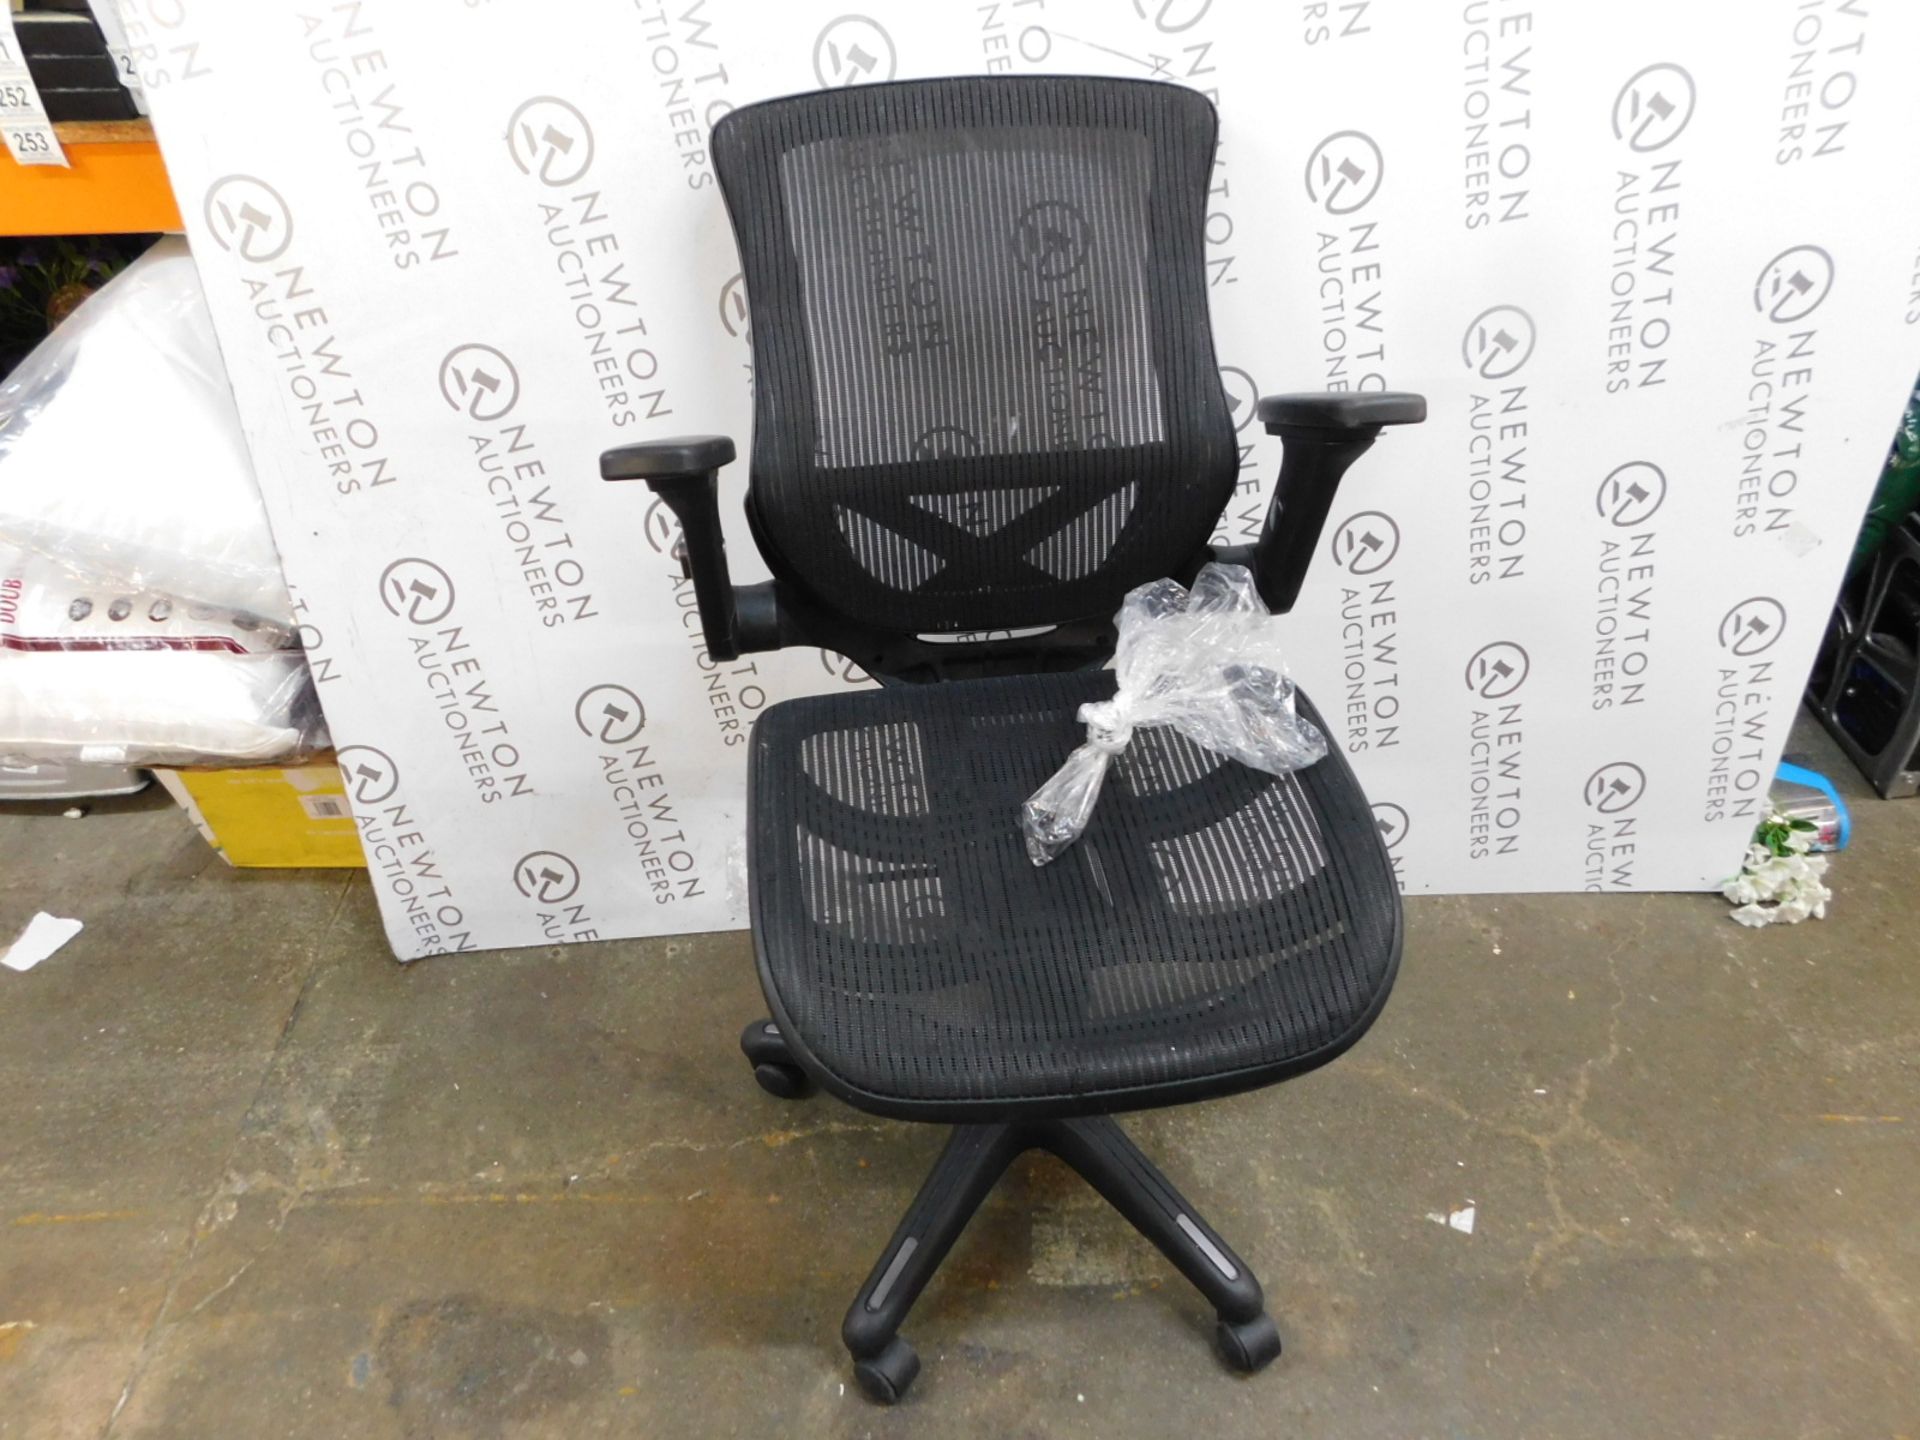 1 BAYSIDE FURNISHINGS METREX BLACK MESH OFFICE CHAIR RRP Â£129.99 (MISSING NUTS FOR BACK REST)